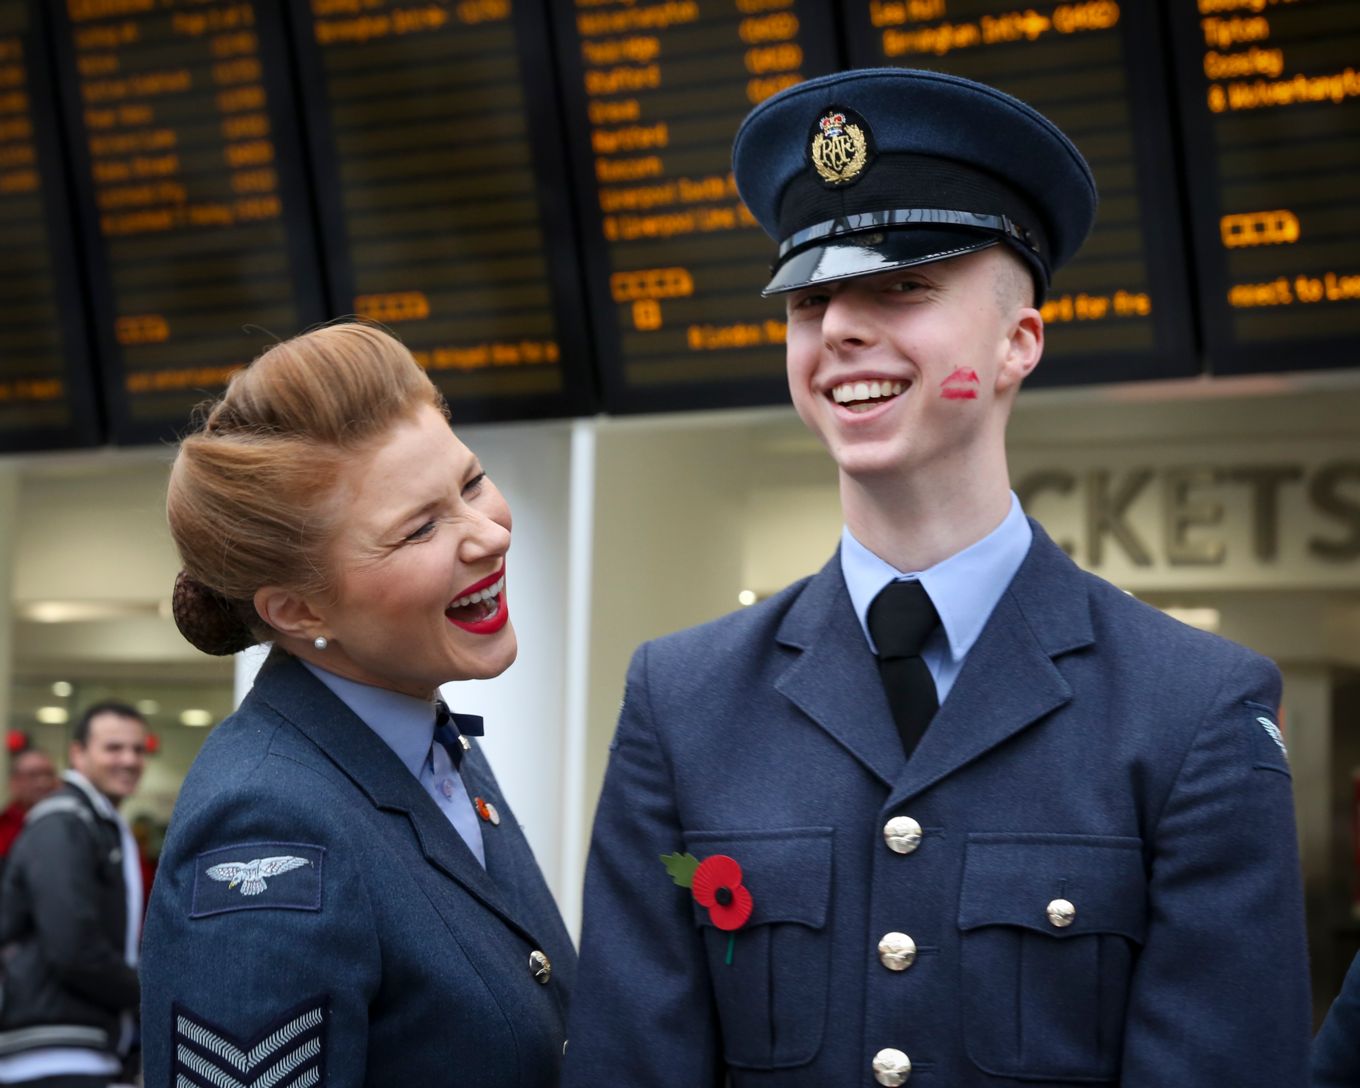 Airman with lipstick kiss on cheek from one of the D Day Darlings